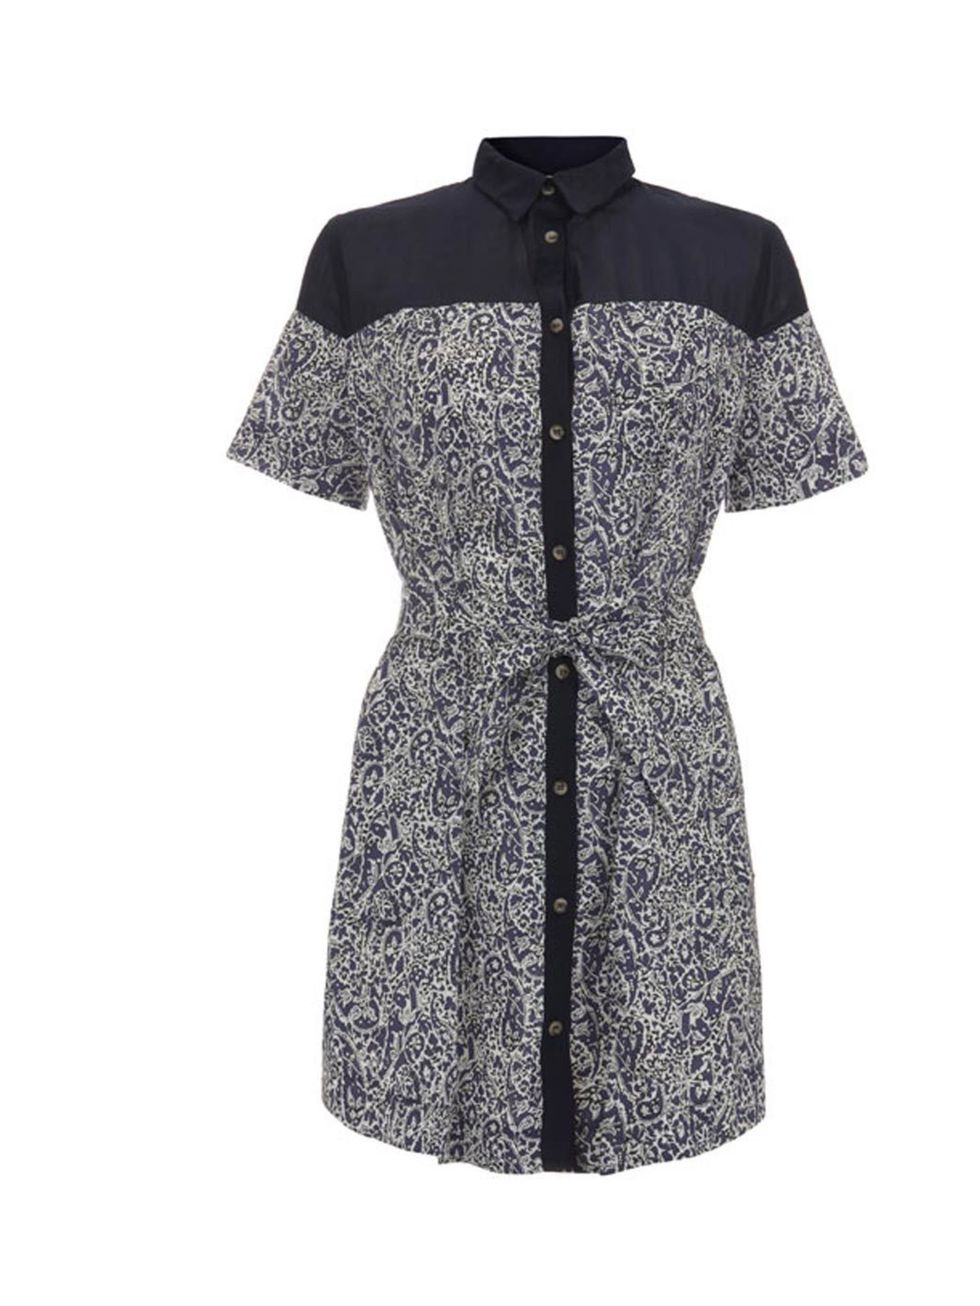 <p>Everyone needs a tea dress in their spring arsenal, and this bang-on-trend paisley number is the stand-out winner b Store x liberty paisley print dress, £195, at Liberty</p><p><a href="http://shopping.elleuk.com/browse?fts=b+store+dress+paisley+dress"